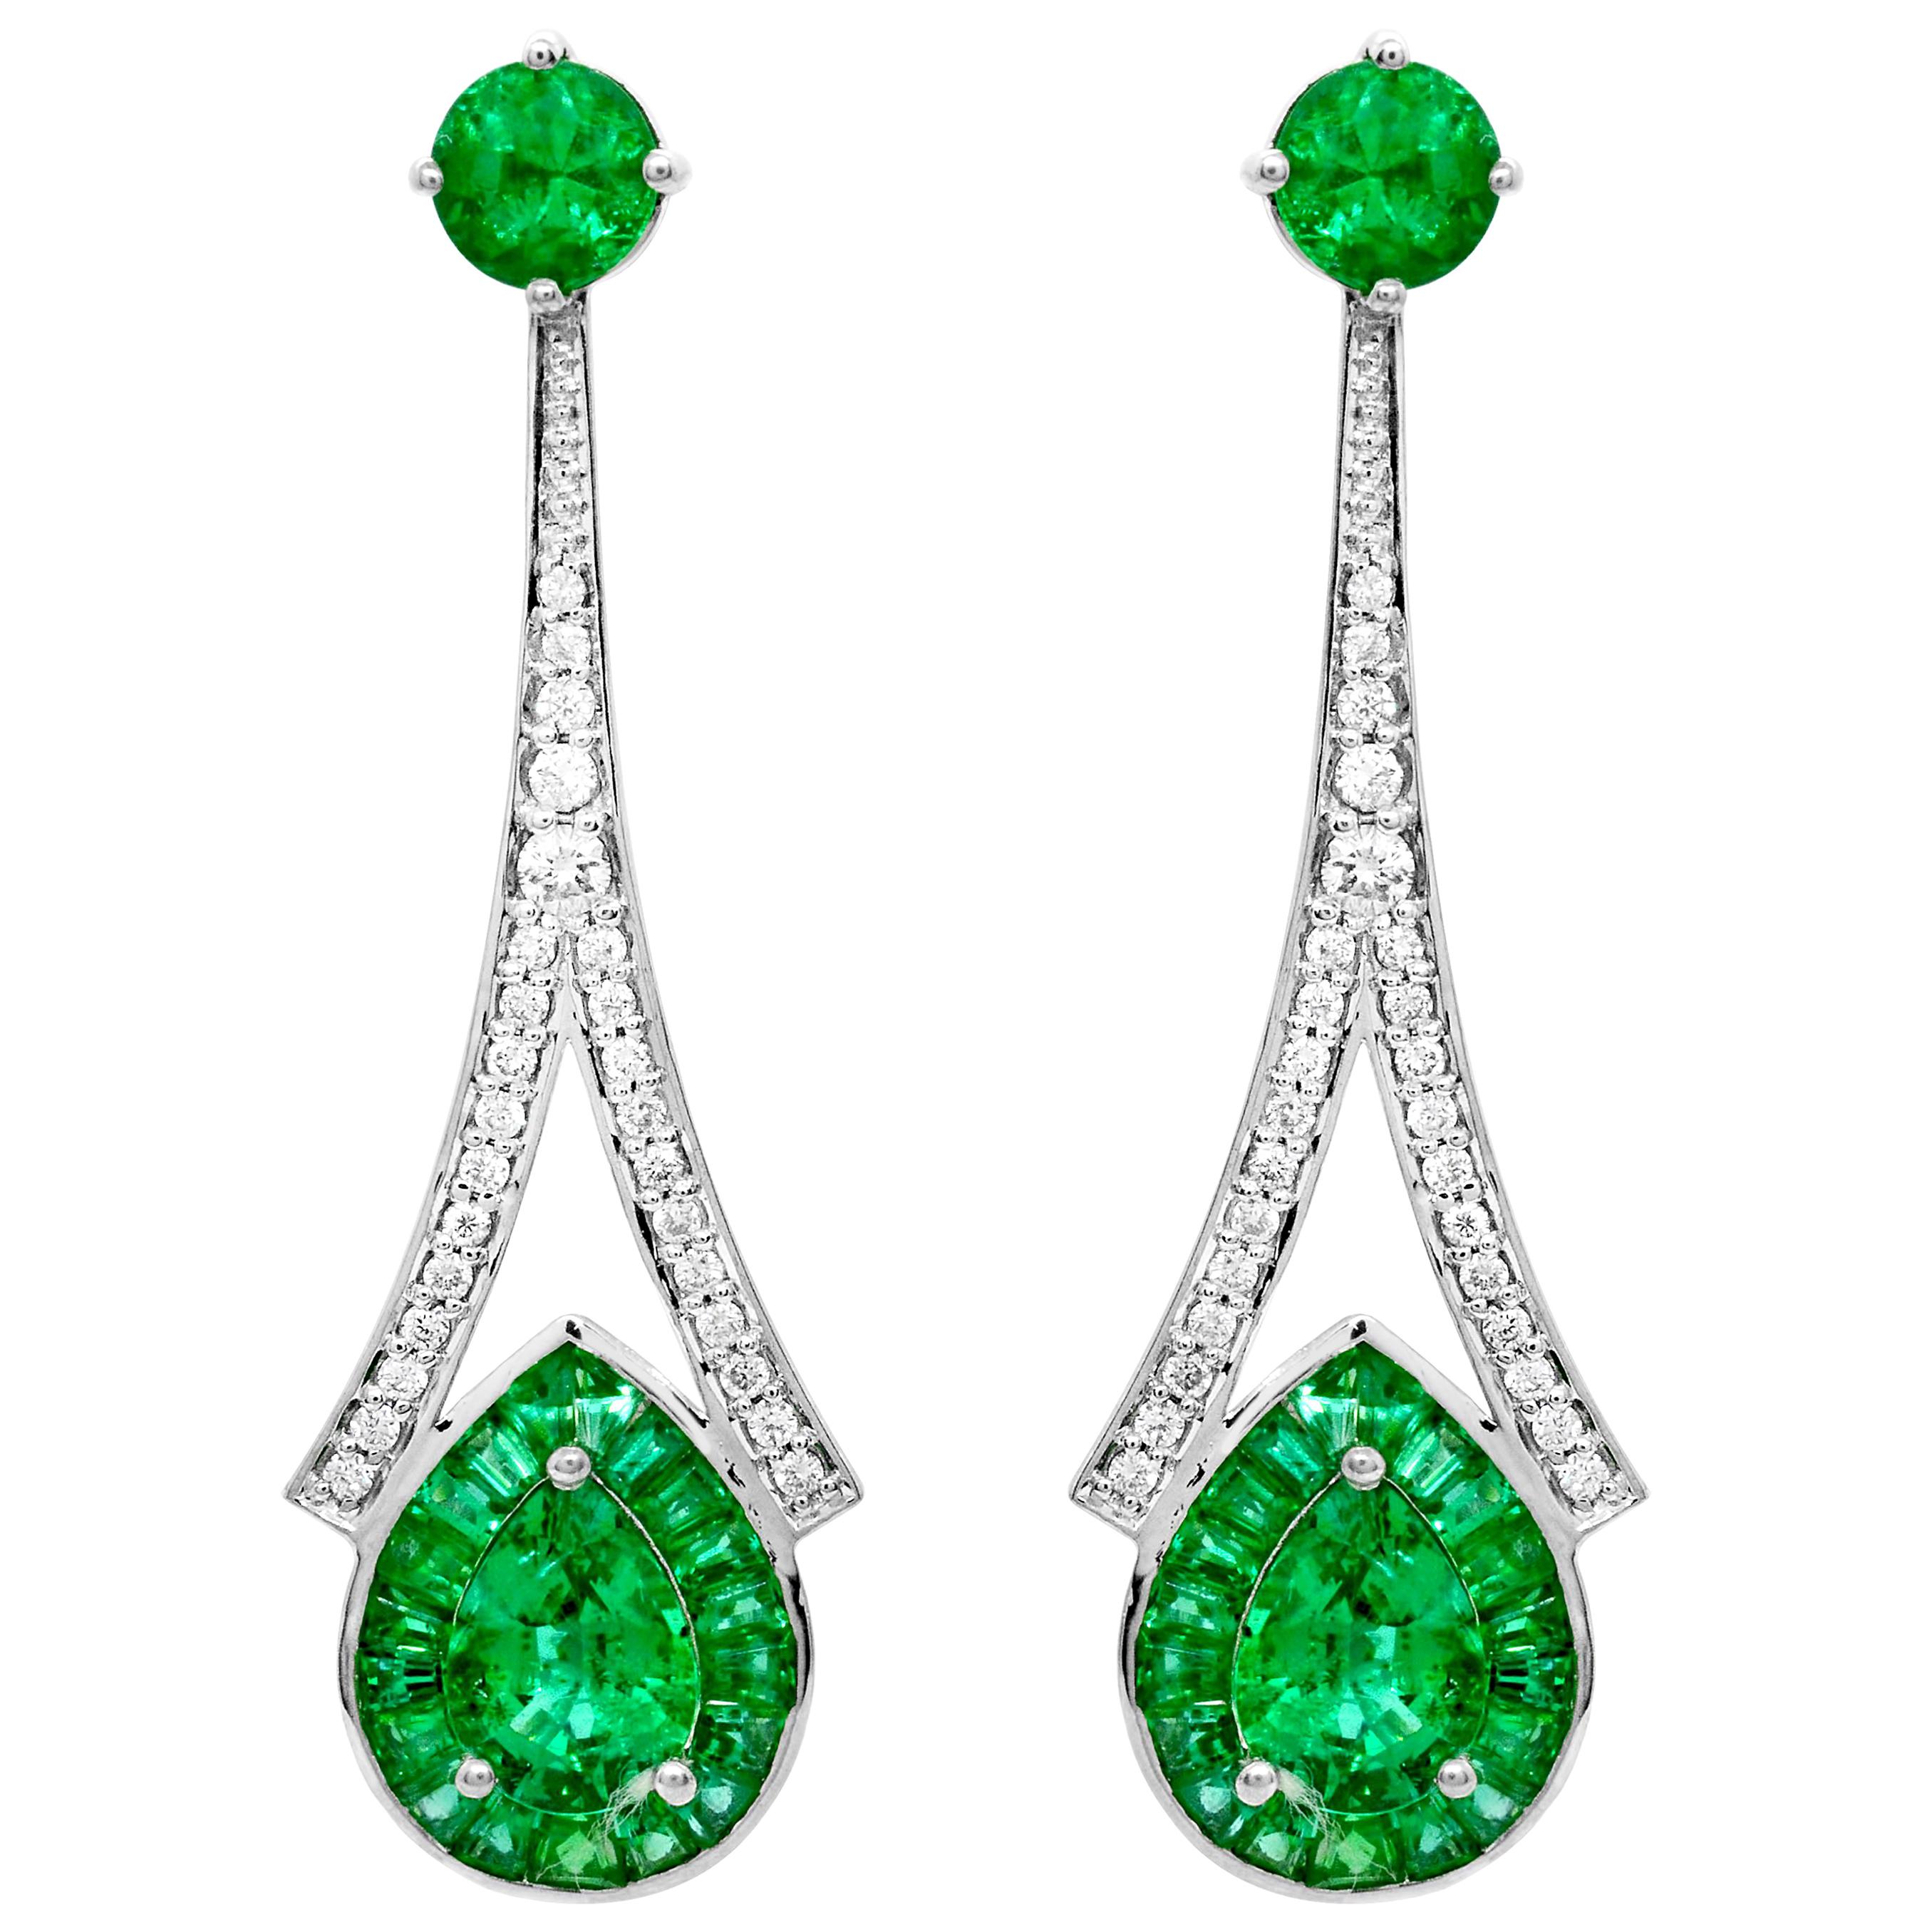 1.28 Carat Pear Emerald 3.76 Carats Total Emerald 14K White Gold Drop Earrings For Sale